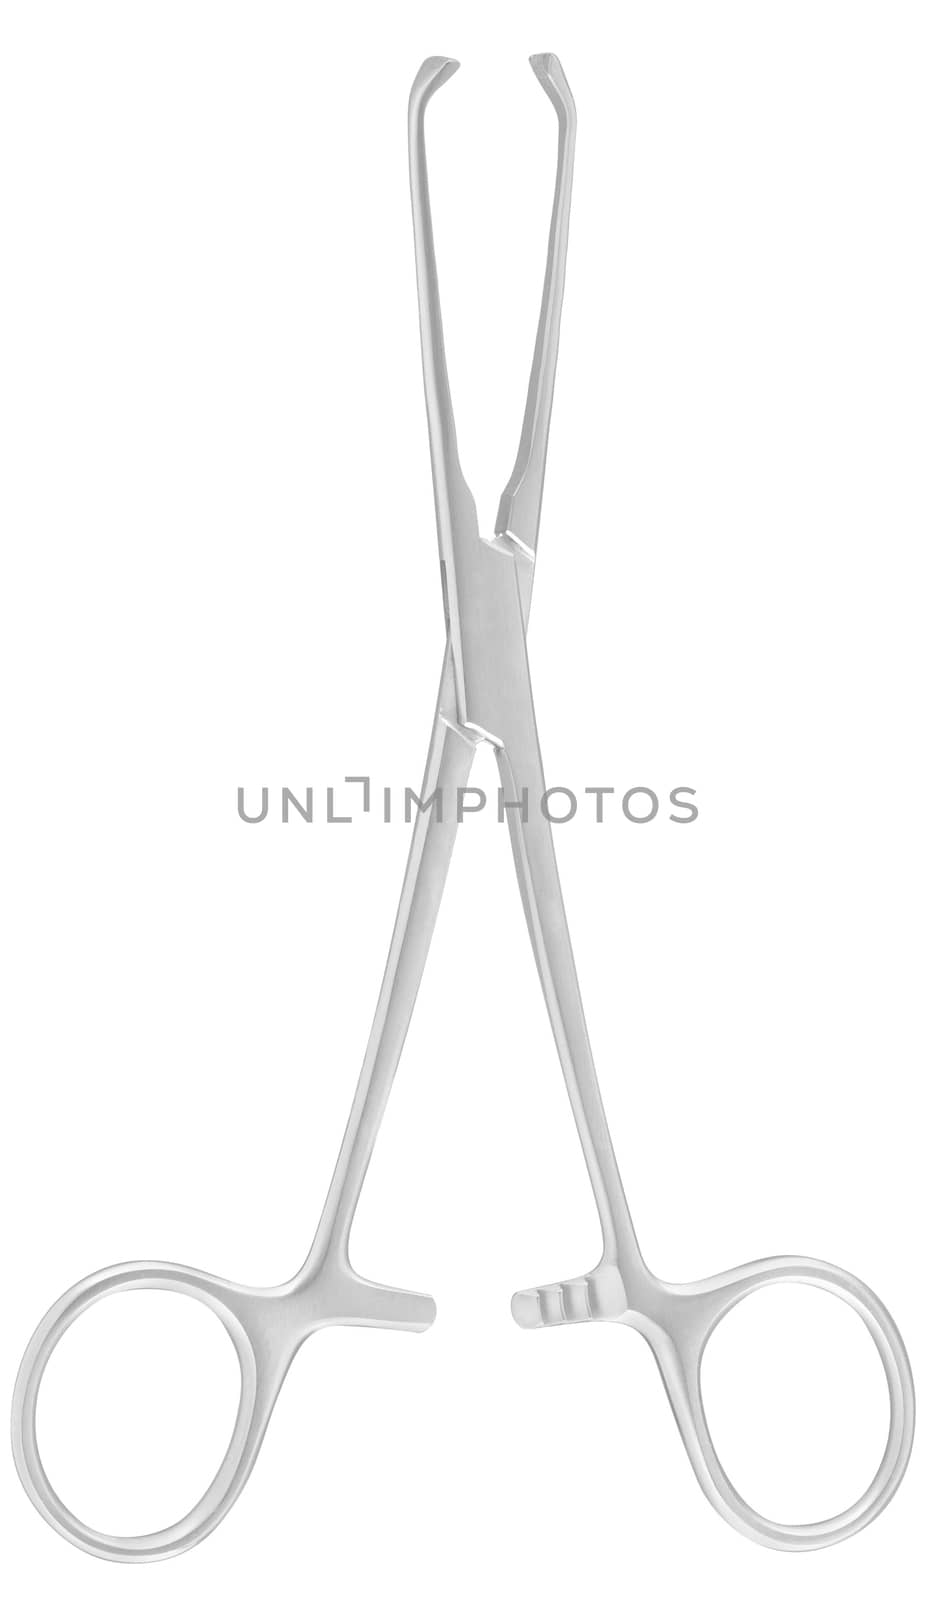 surgical clamps on a white background isolation